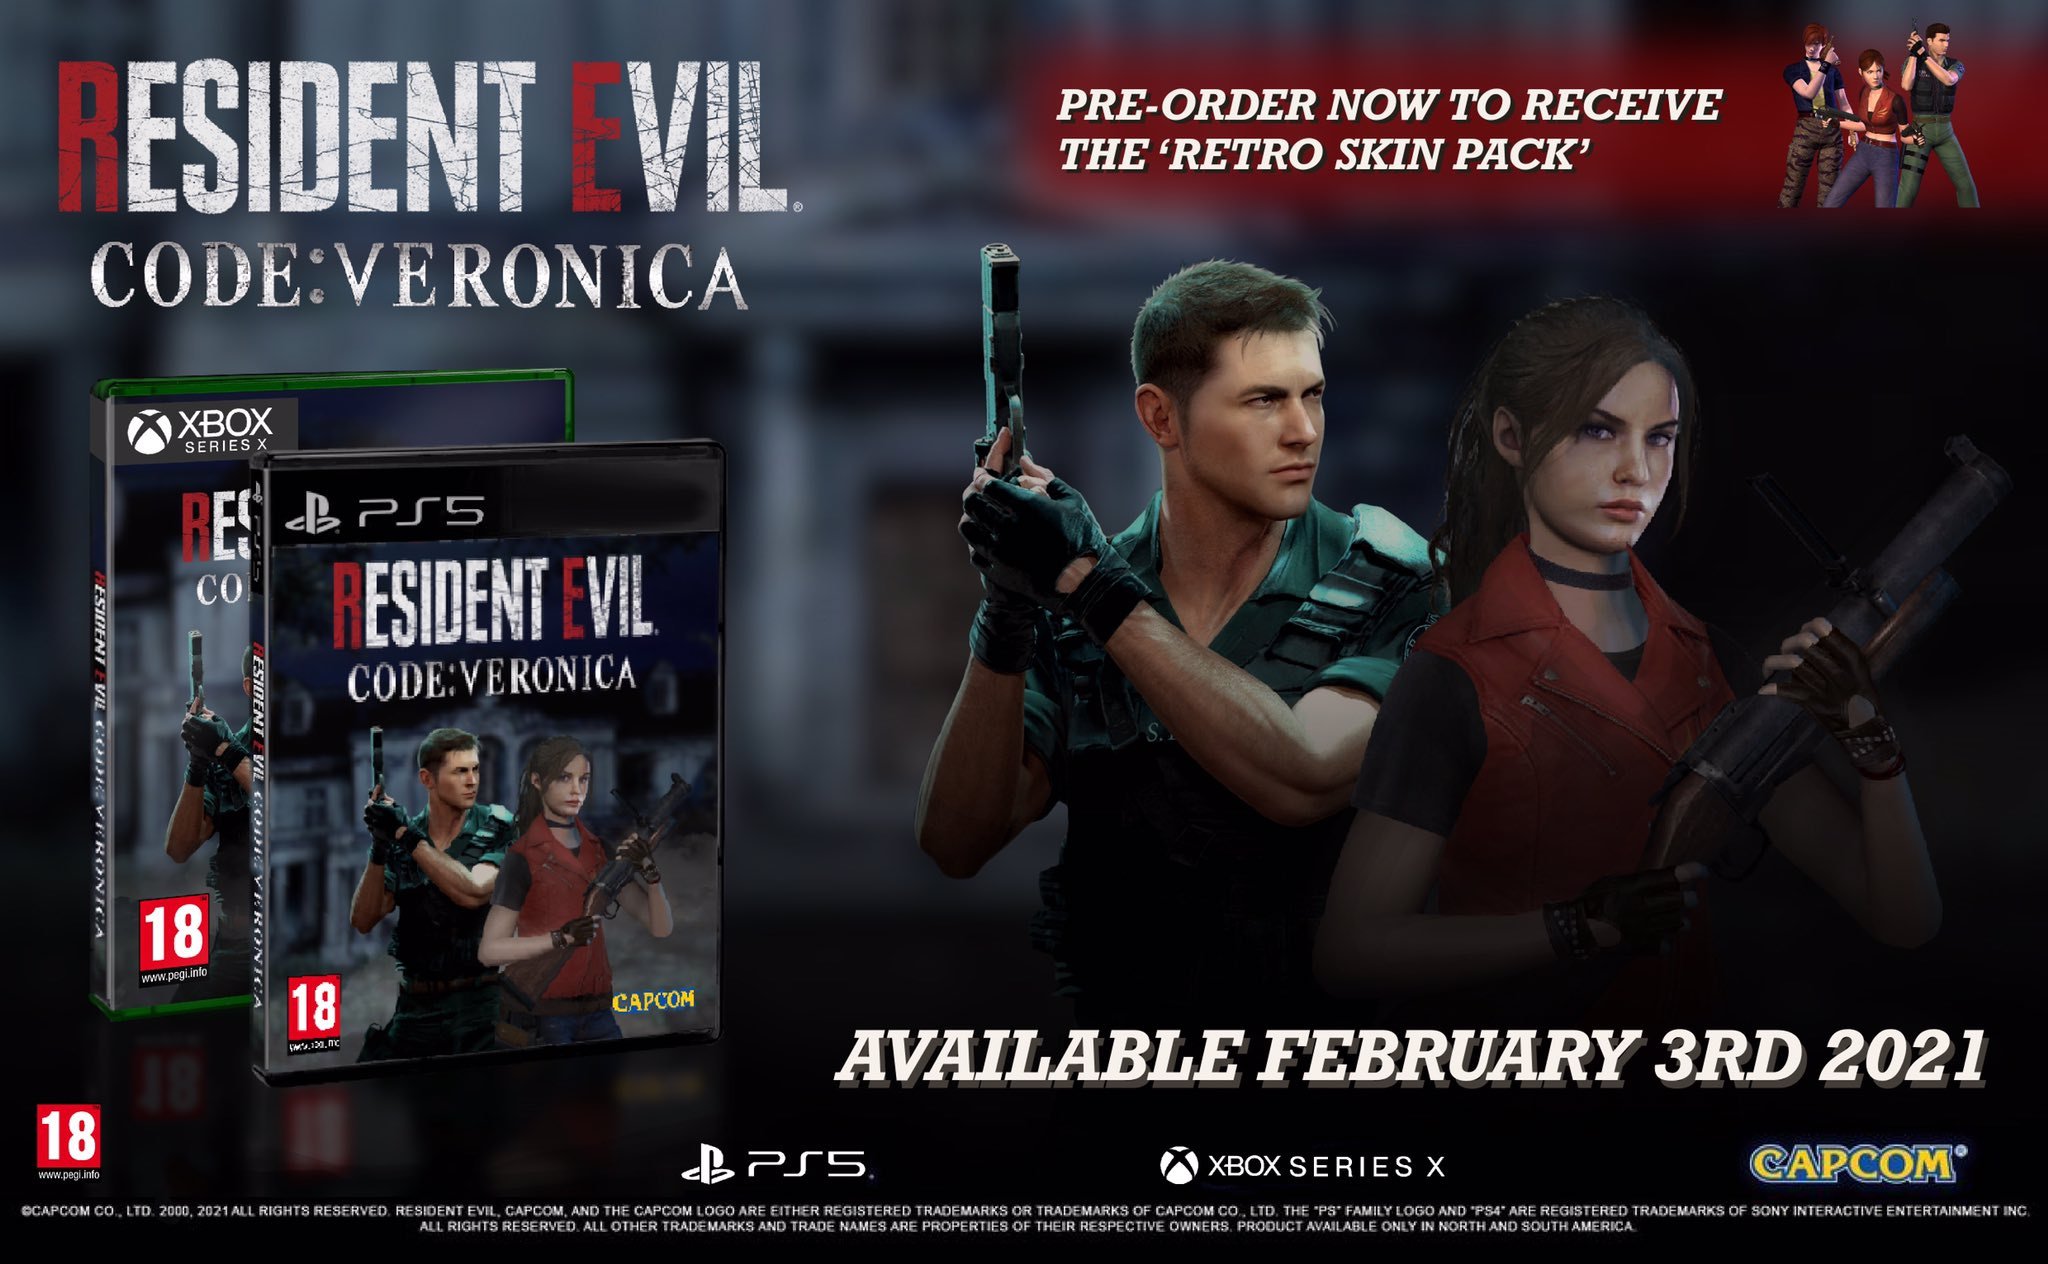 resident evil 2 discount code ps4